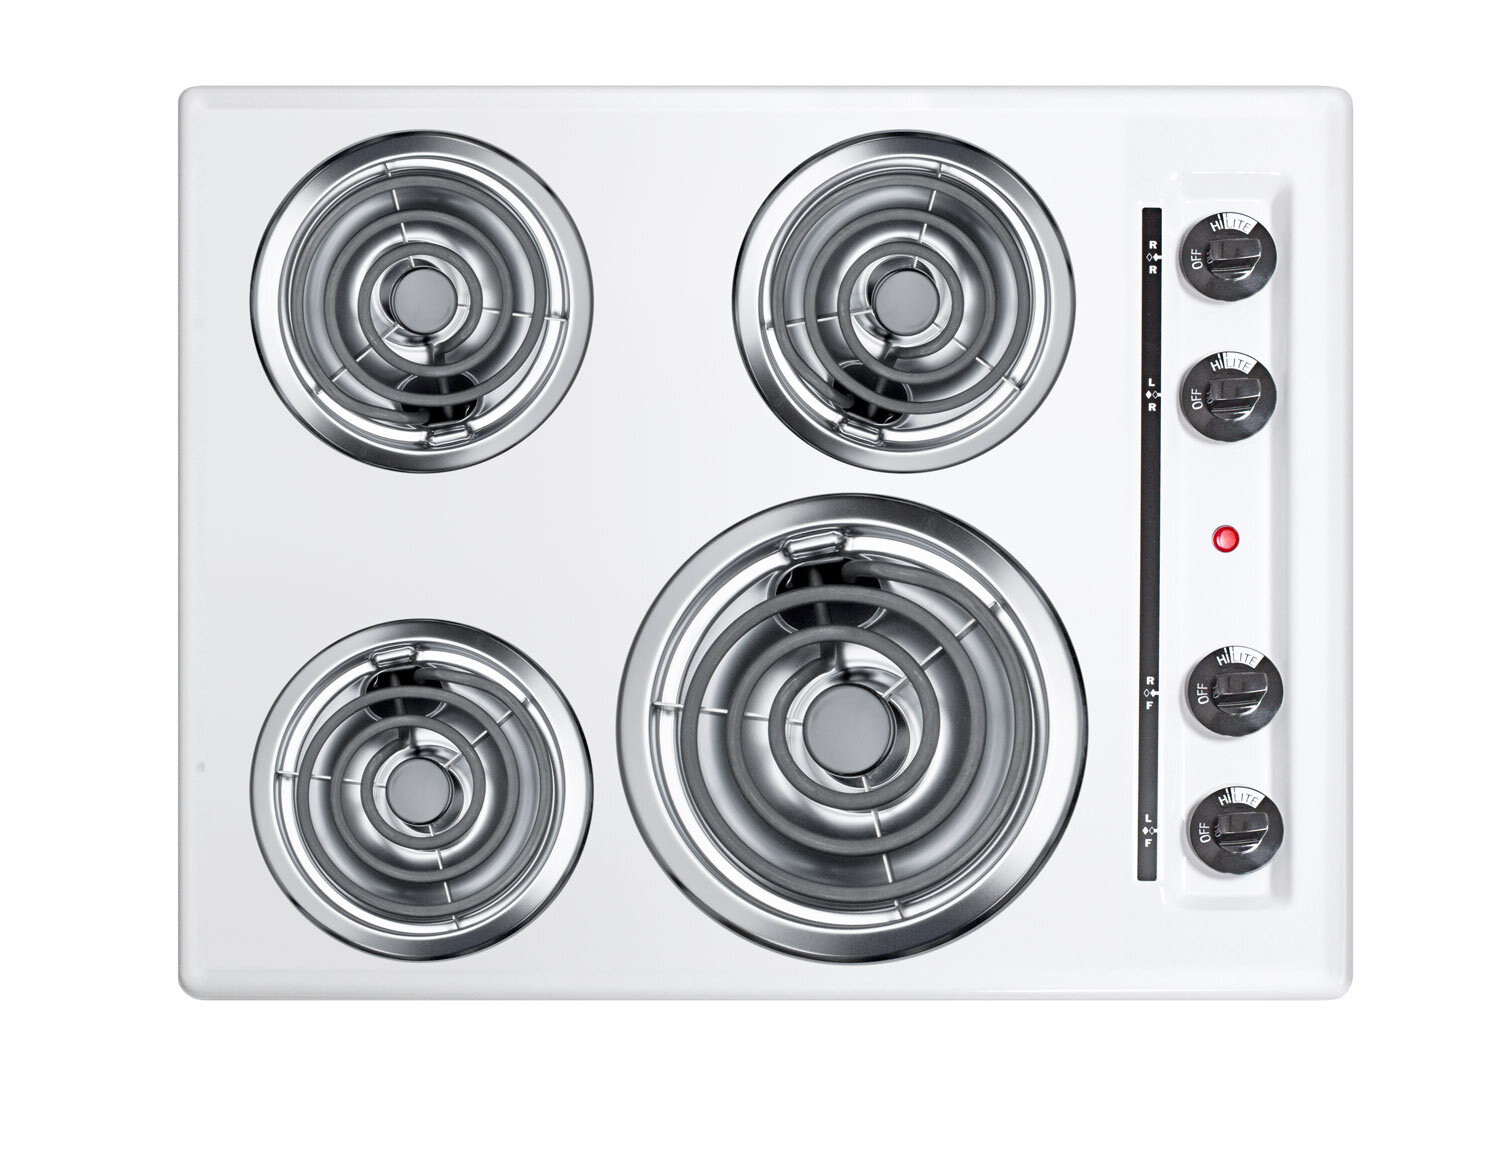 Summit Appliance Summit 24 Electric Cooktop & Reviews